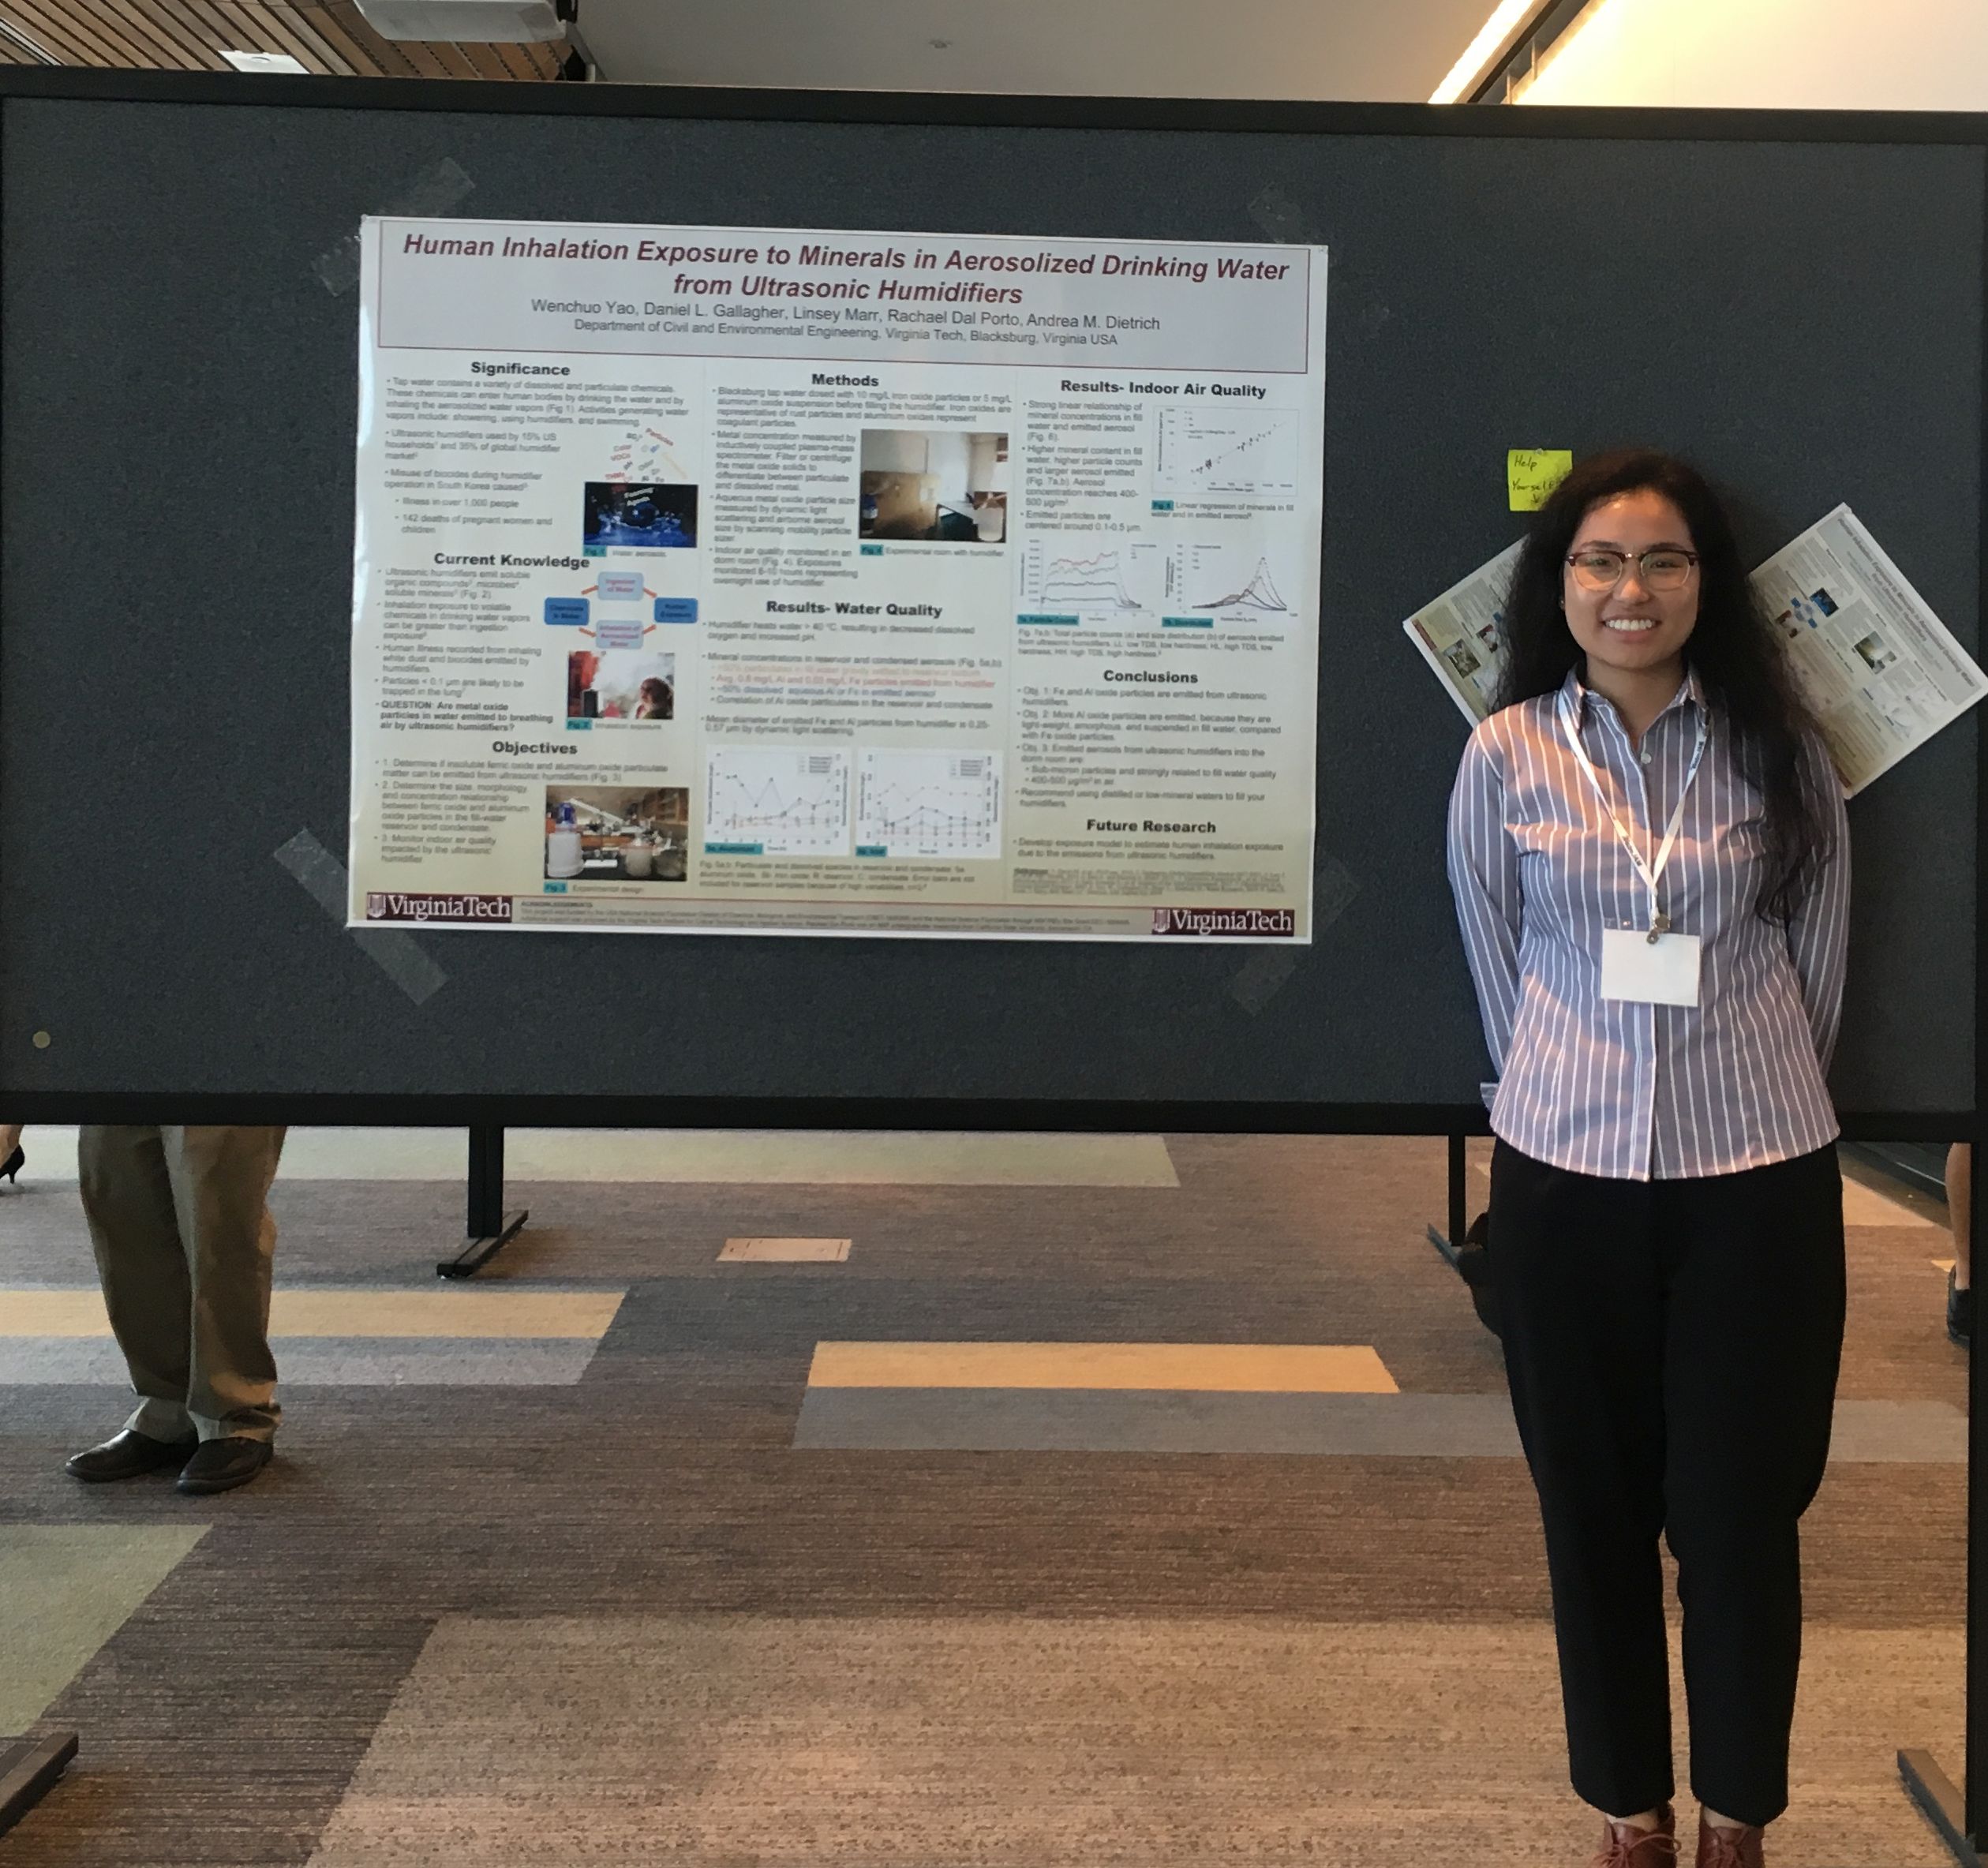 Wenchuo Yao with her poster at a conference